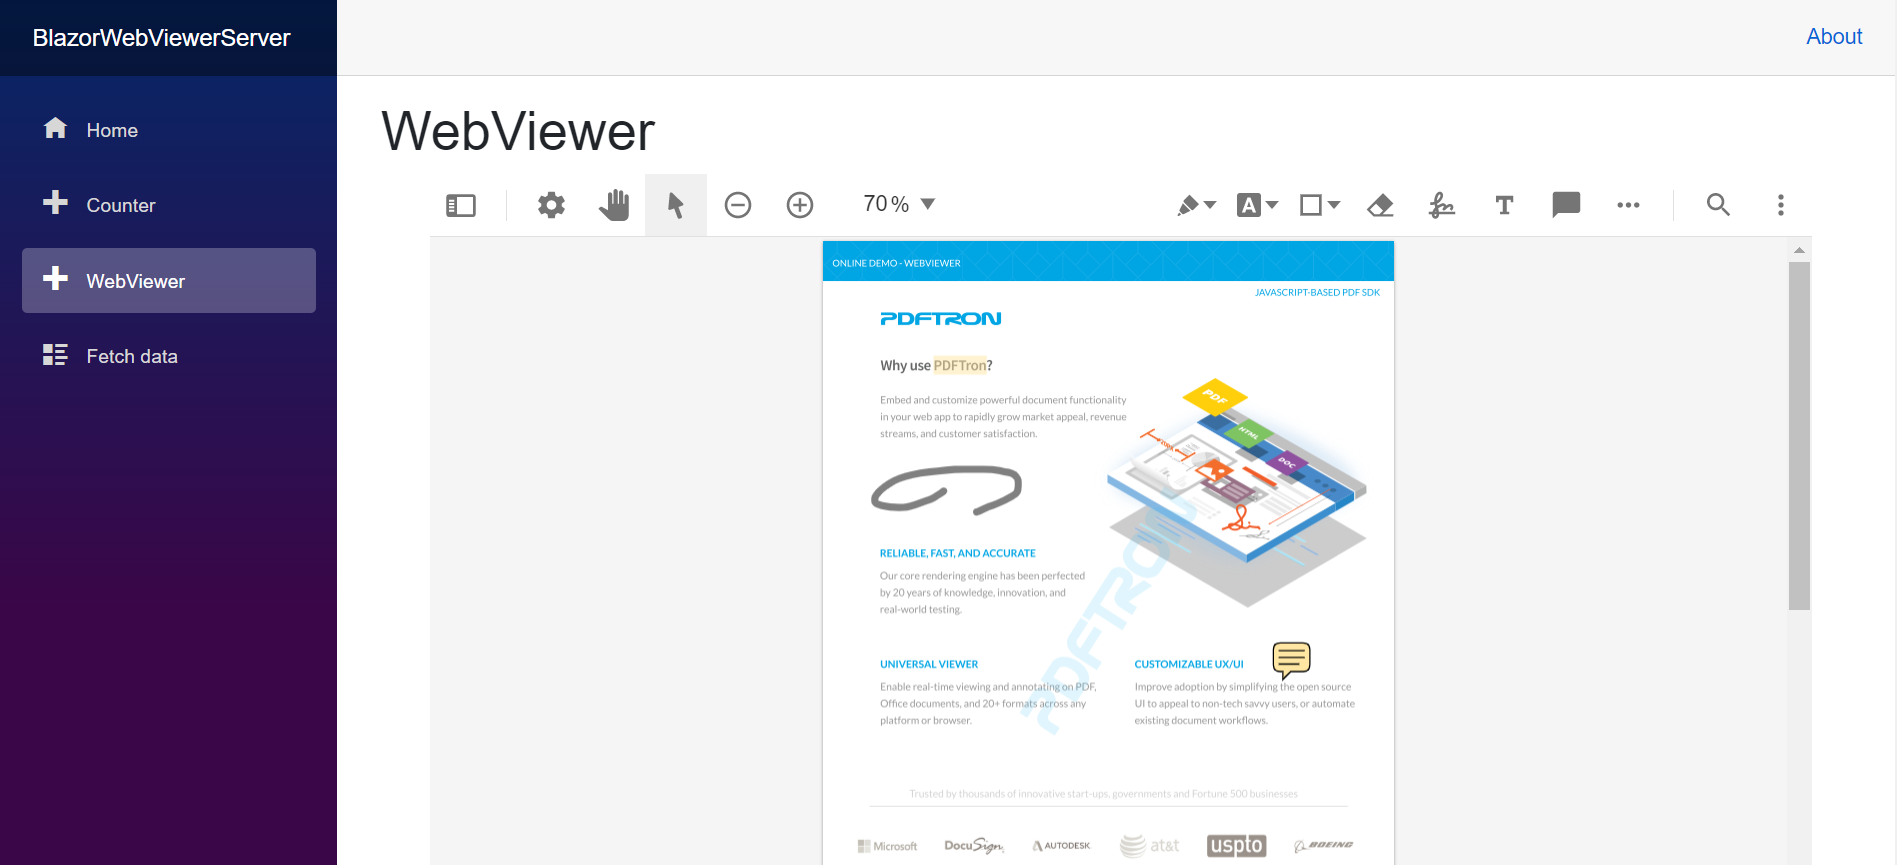 WebViewer integrated in Blazor sample